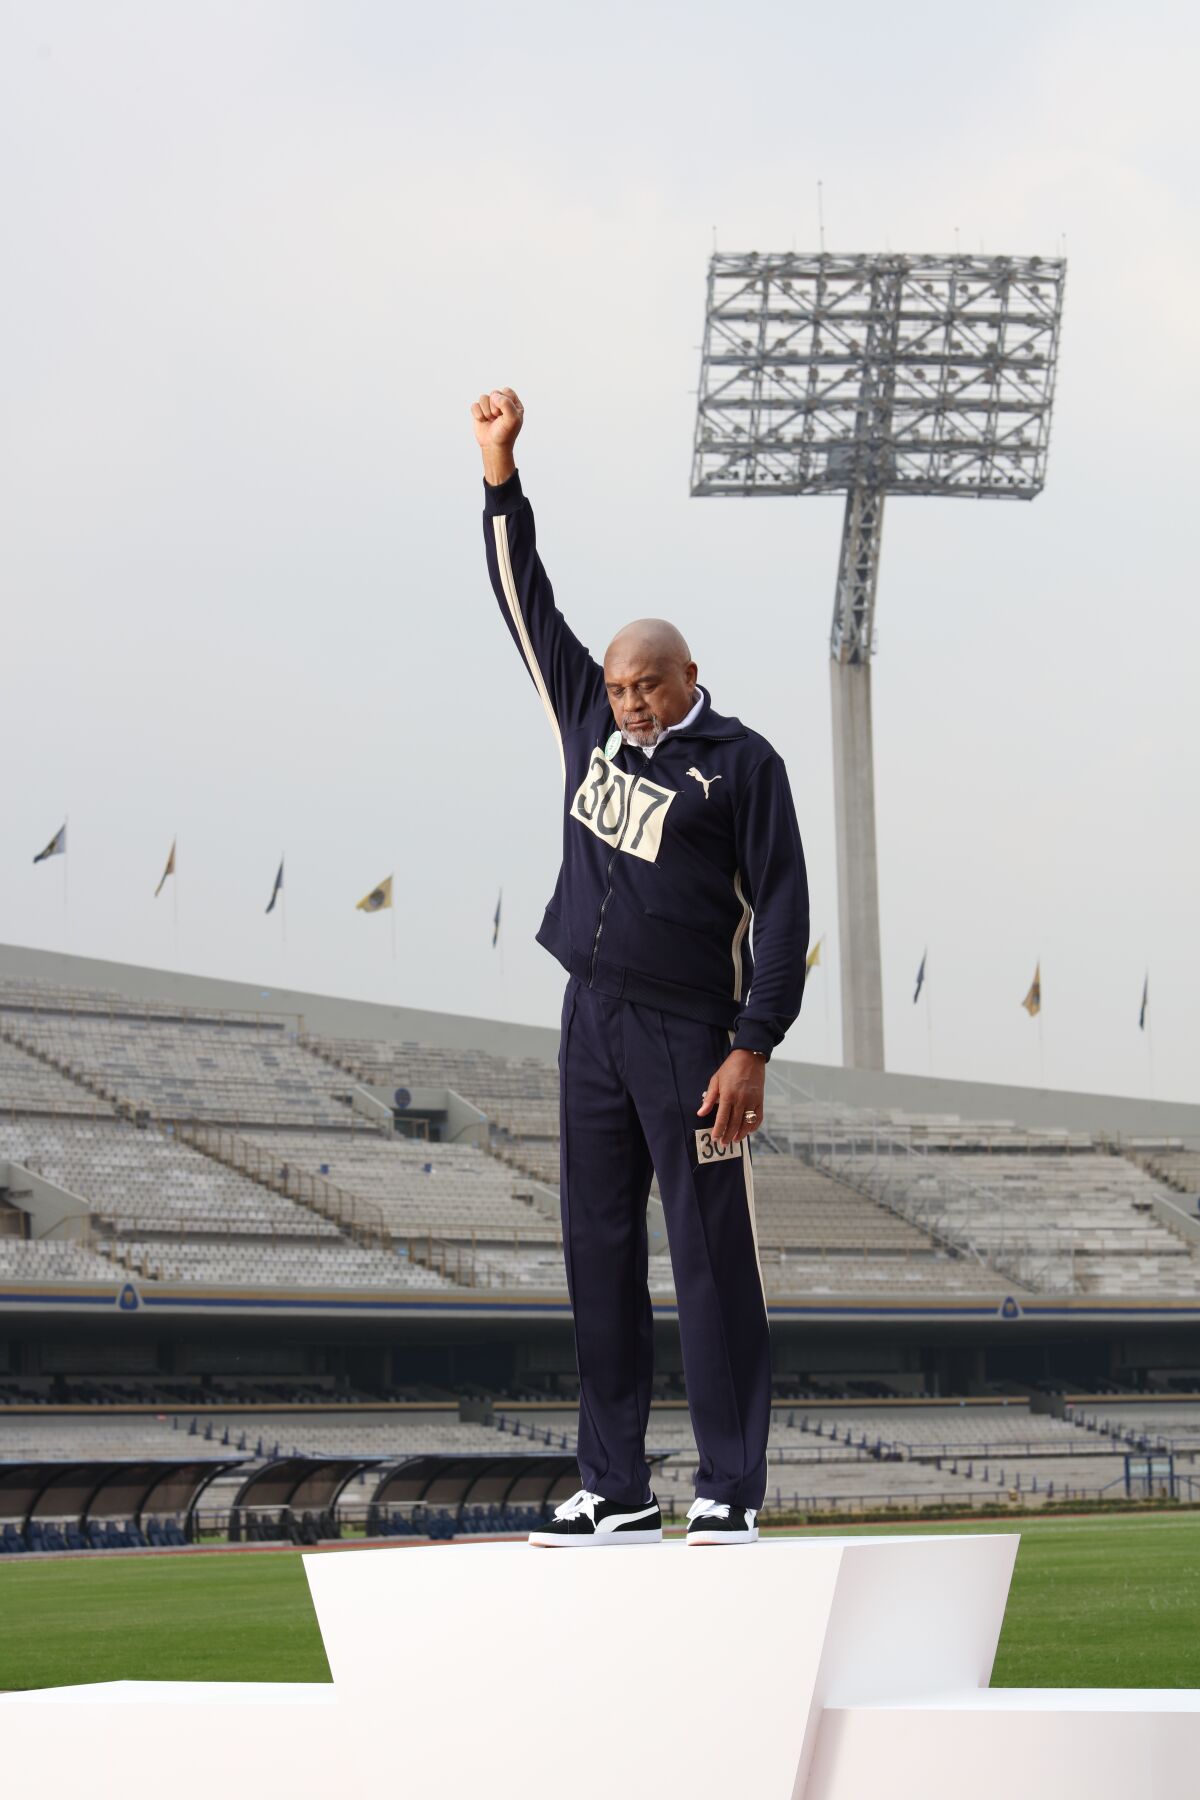 Olympic gold medalist Tommie Smith in the documentary "With Drawn Arms."